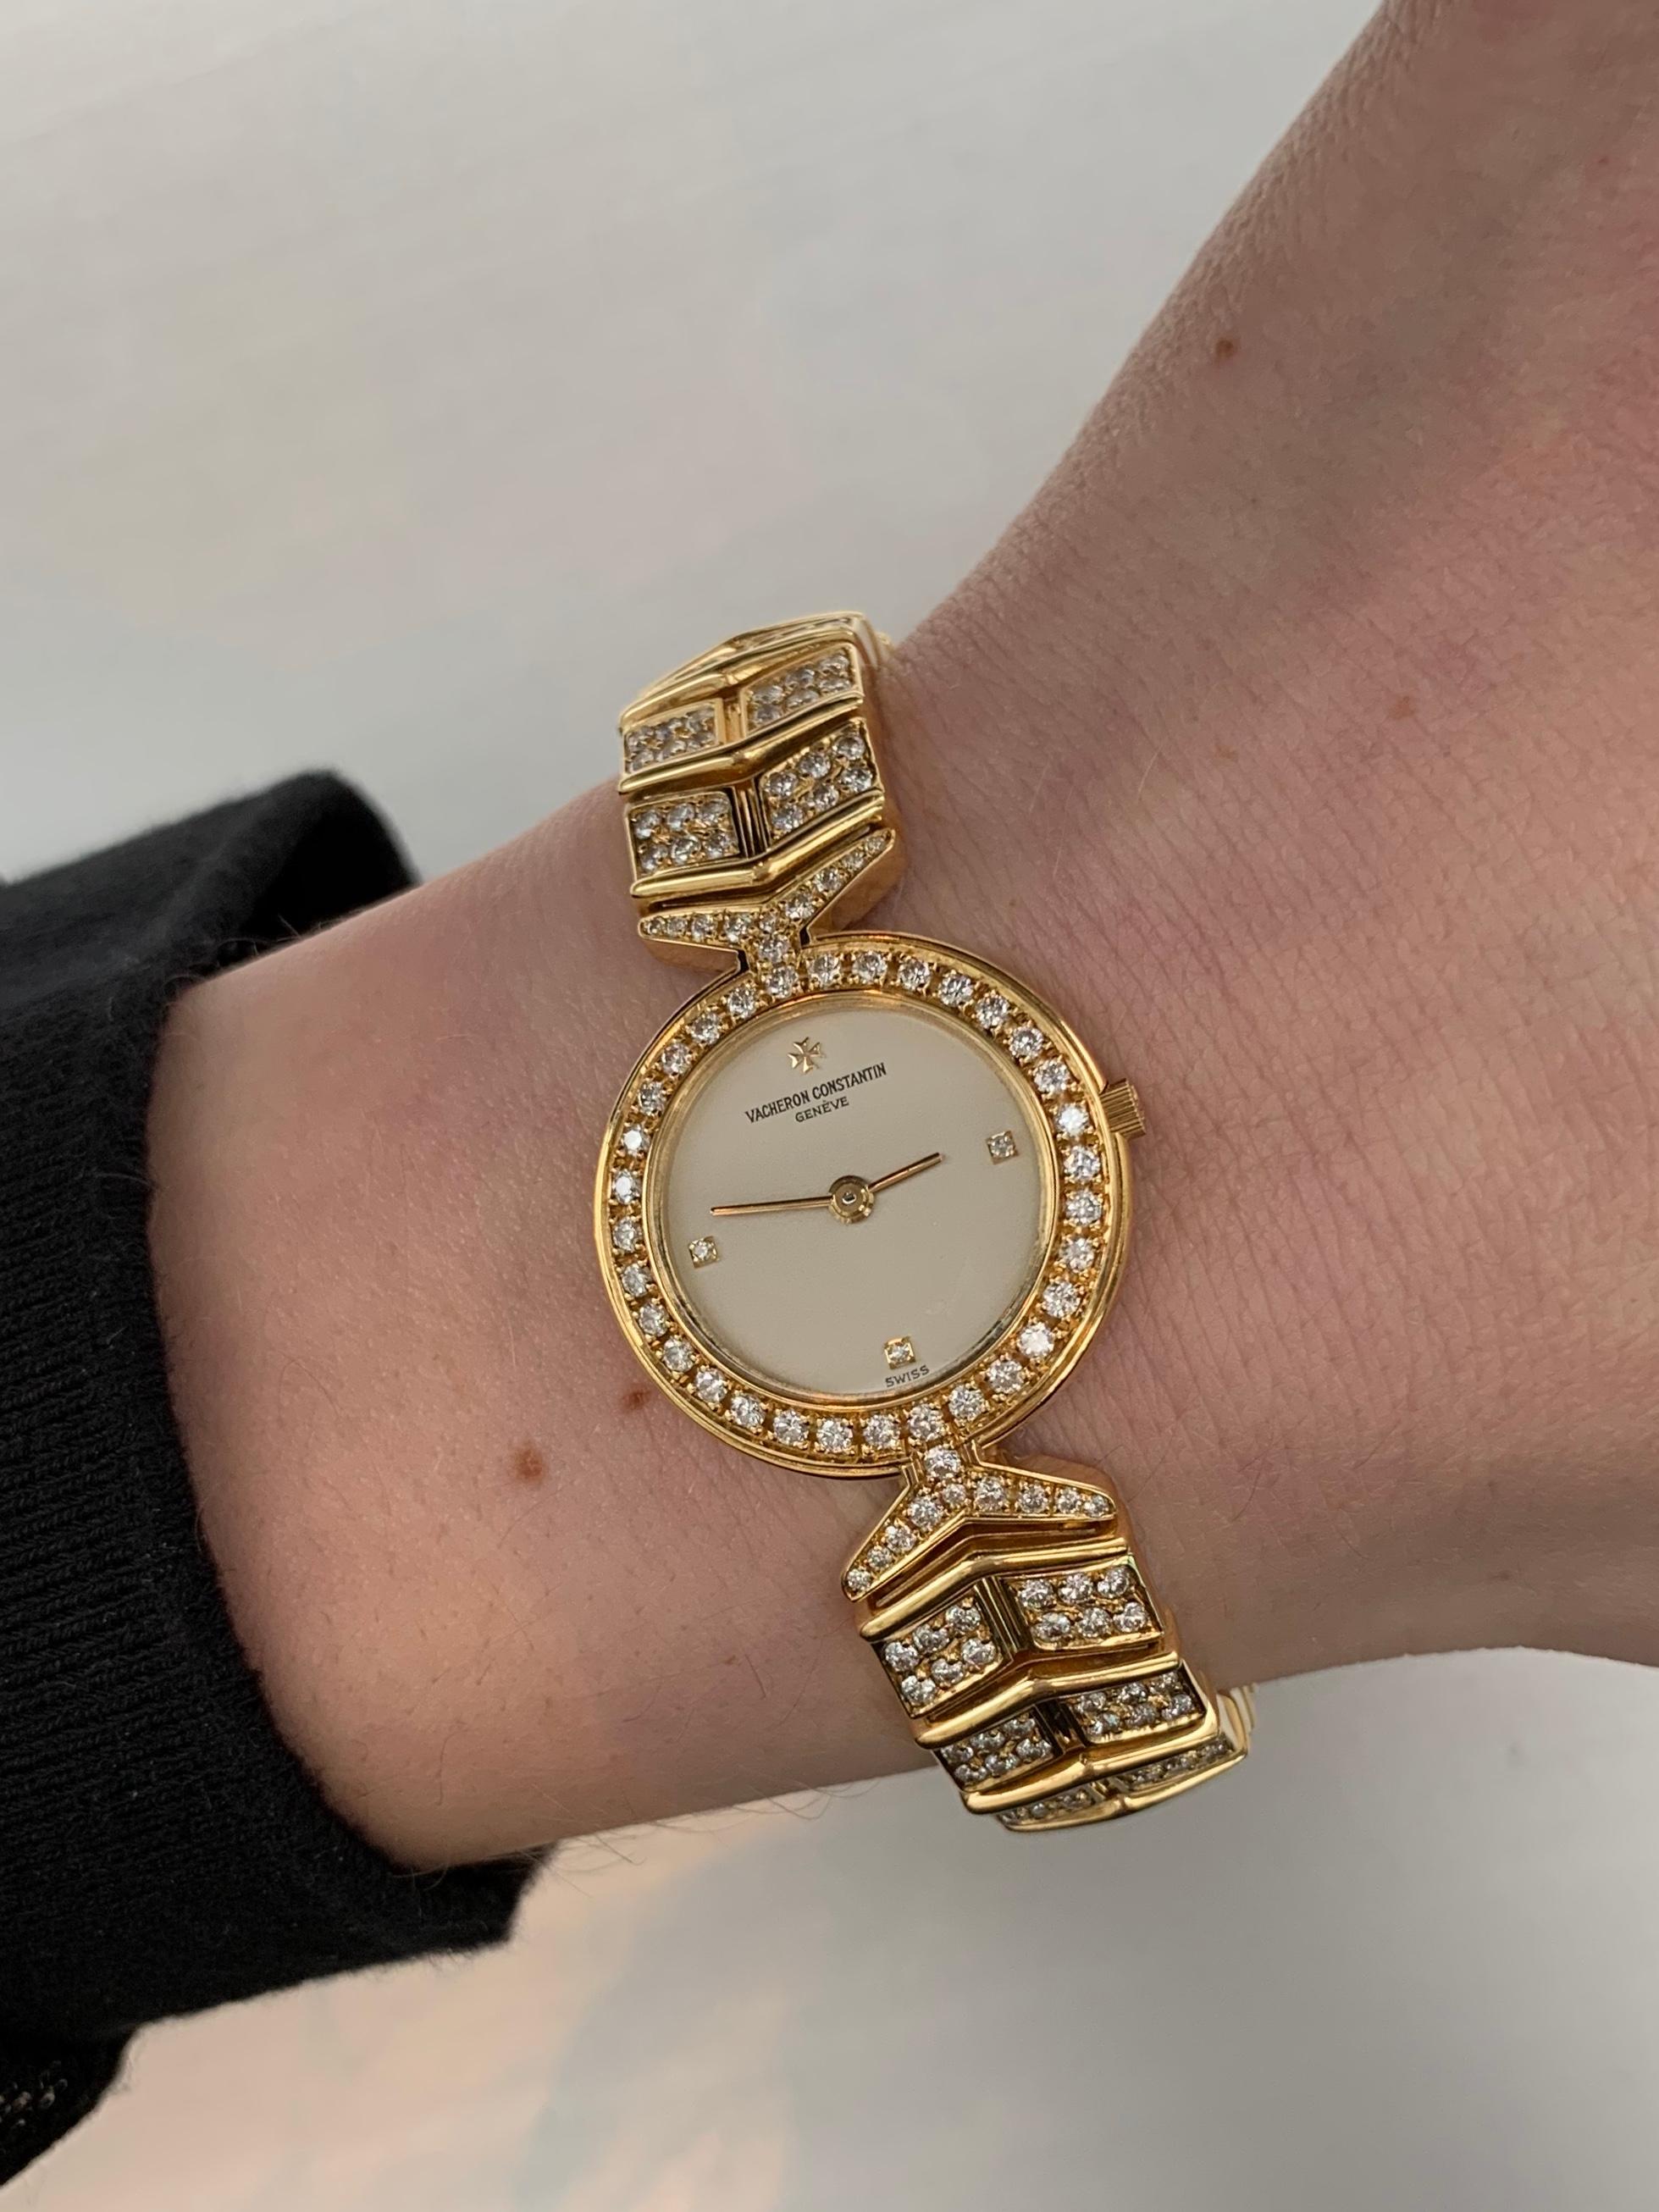 An 18k yellow gold Vacheron Constantin Malta watch with diamond bezel and diamond bracelet. Timepiece has a cream color diamond with three diamond hour marks. Case measures 22mm and bracelet has a width of 11.50mm, fixed with a butterfly deployment